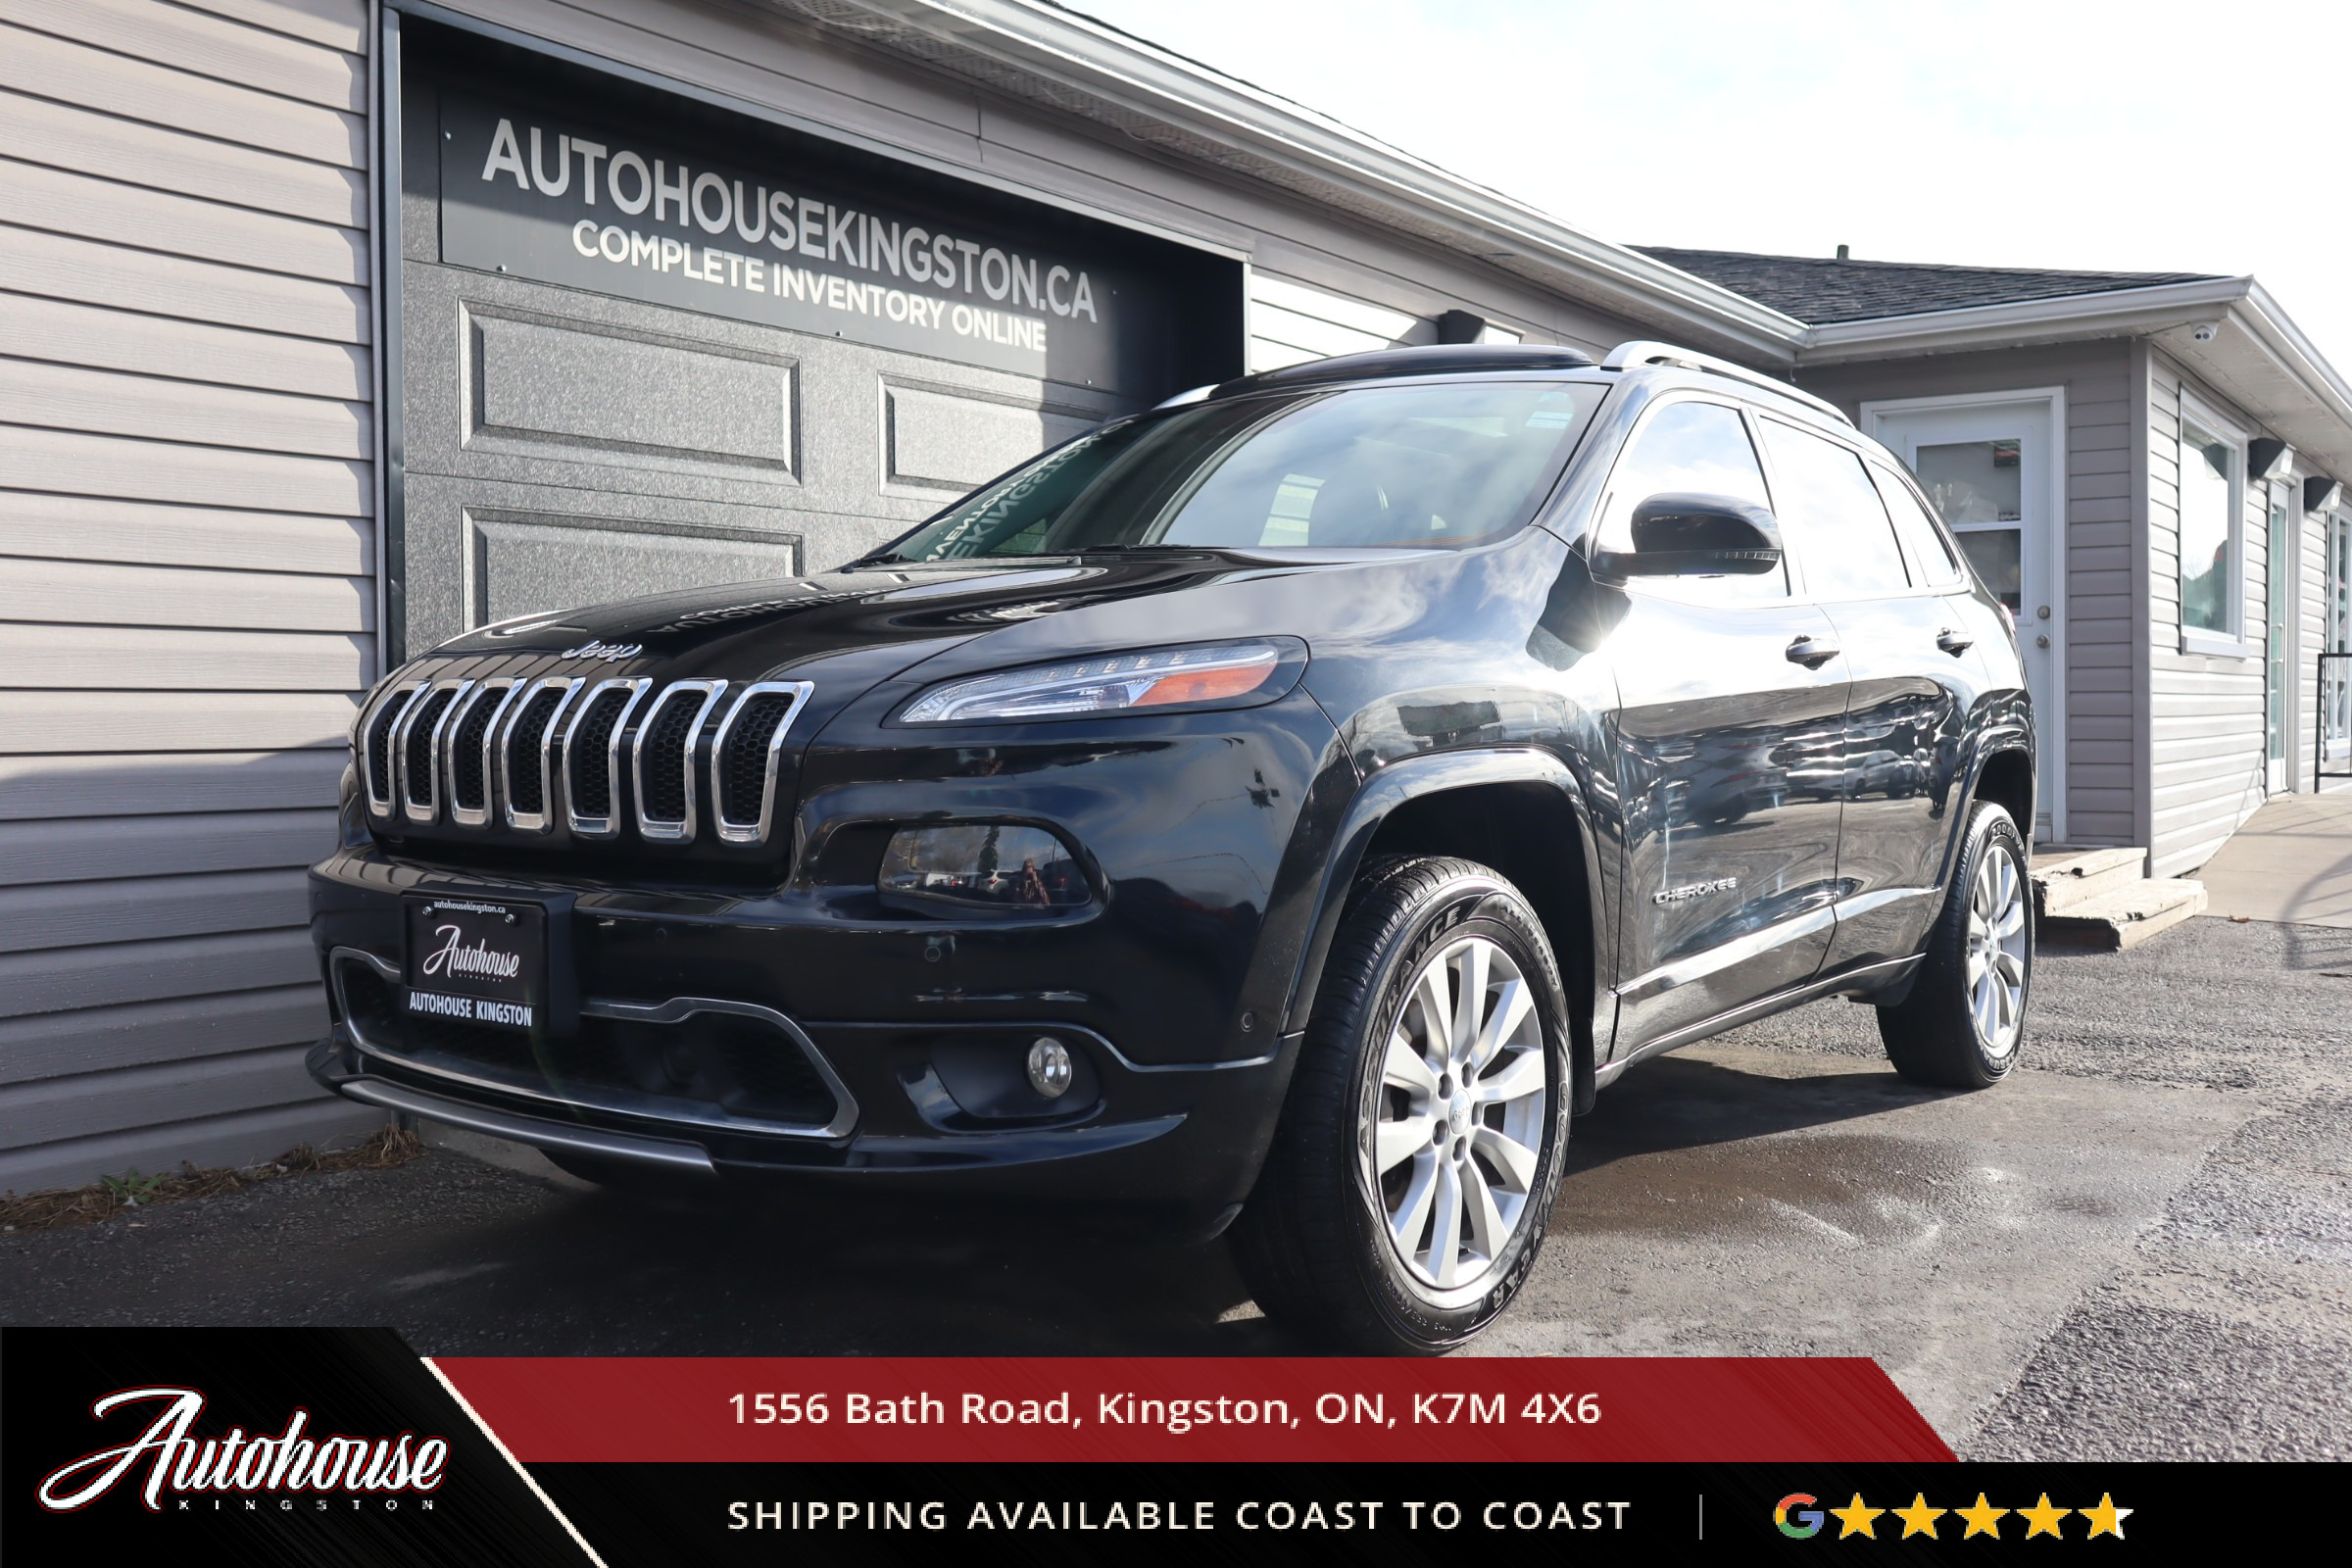 2016 Jeep Cherokee Overland LEATHER - PANORAMIC MOONROOF - REMOTE STA